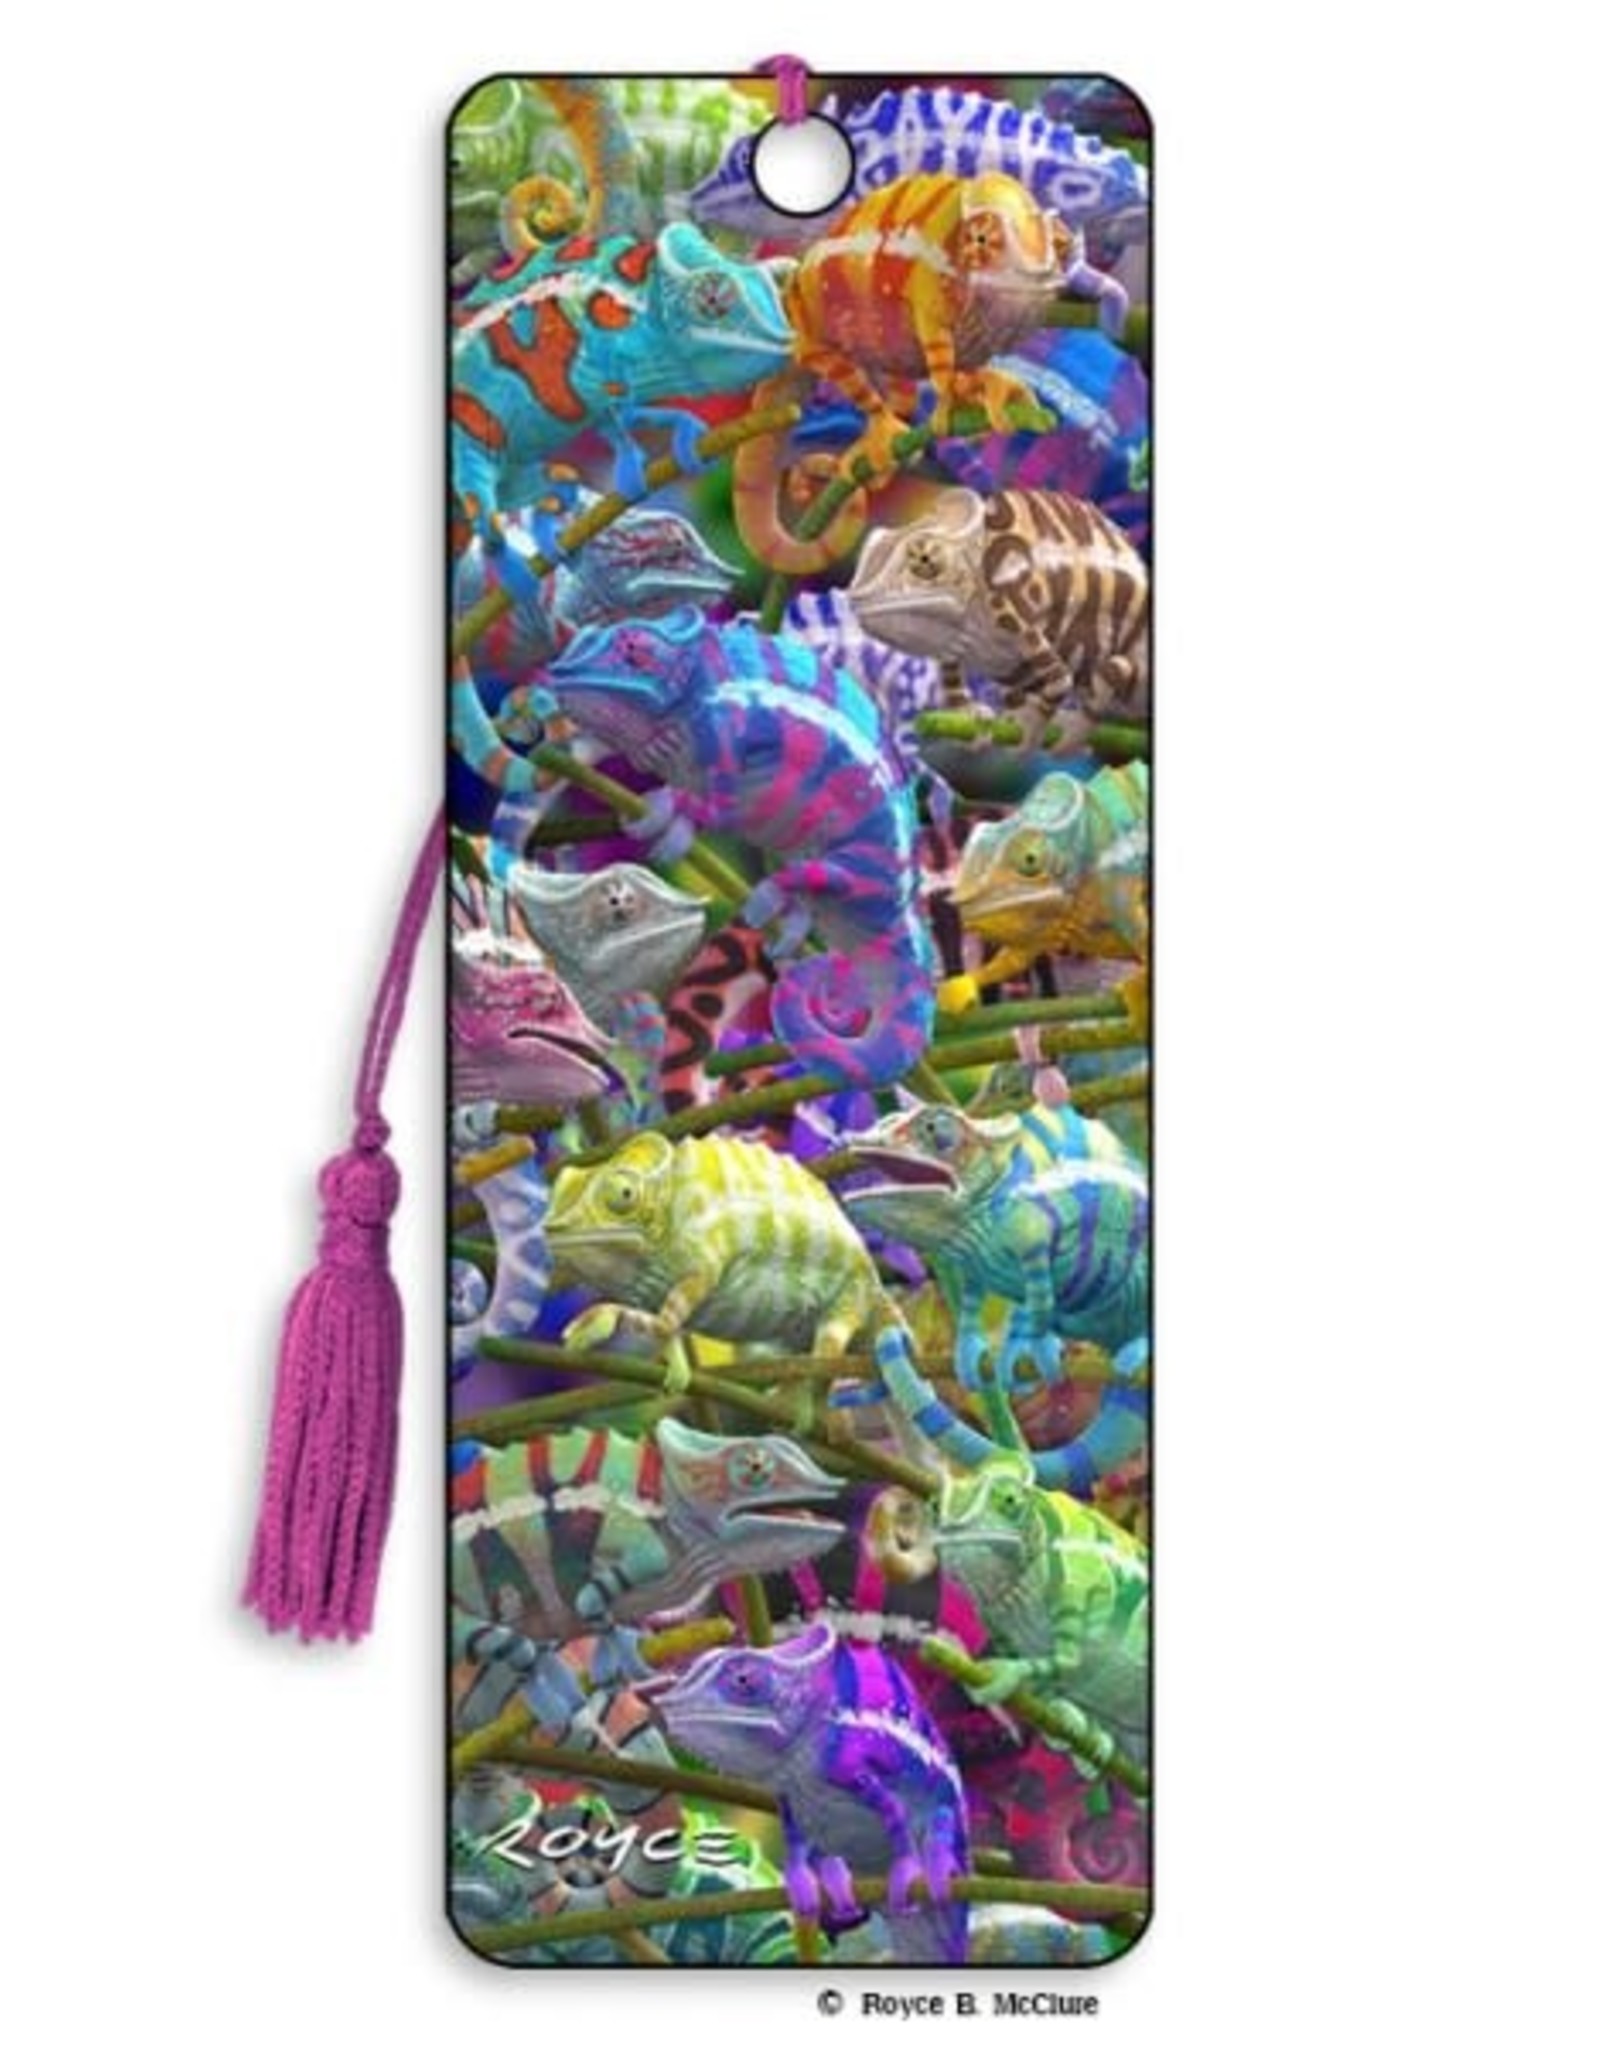 Chameleon  Card and 3D Bookmark